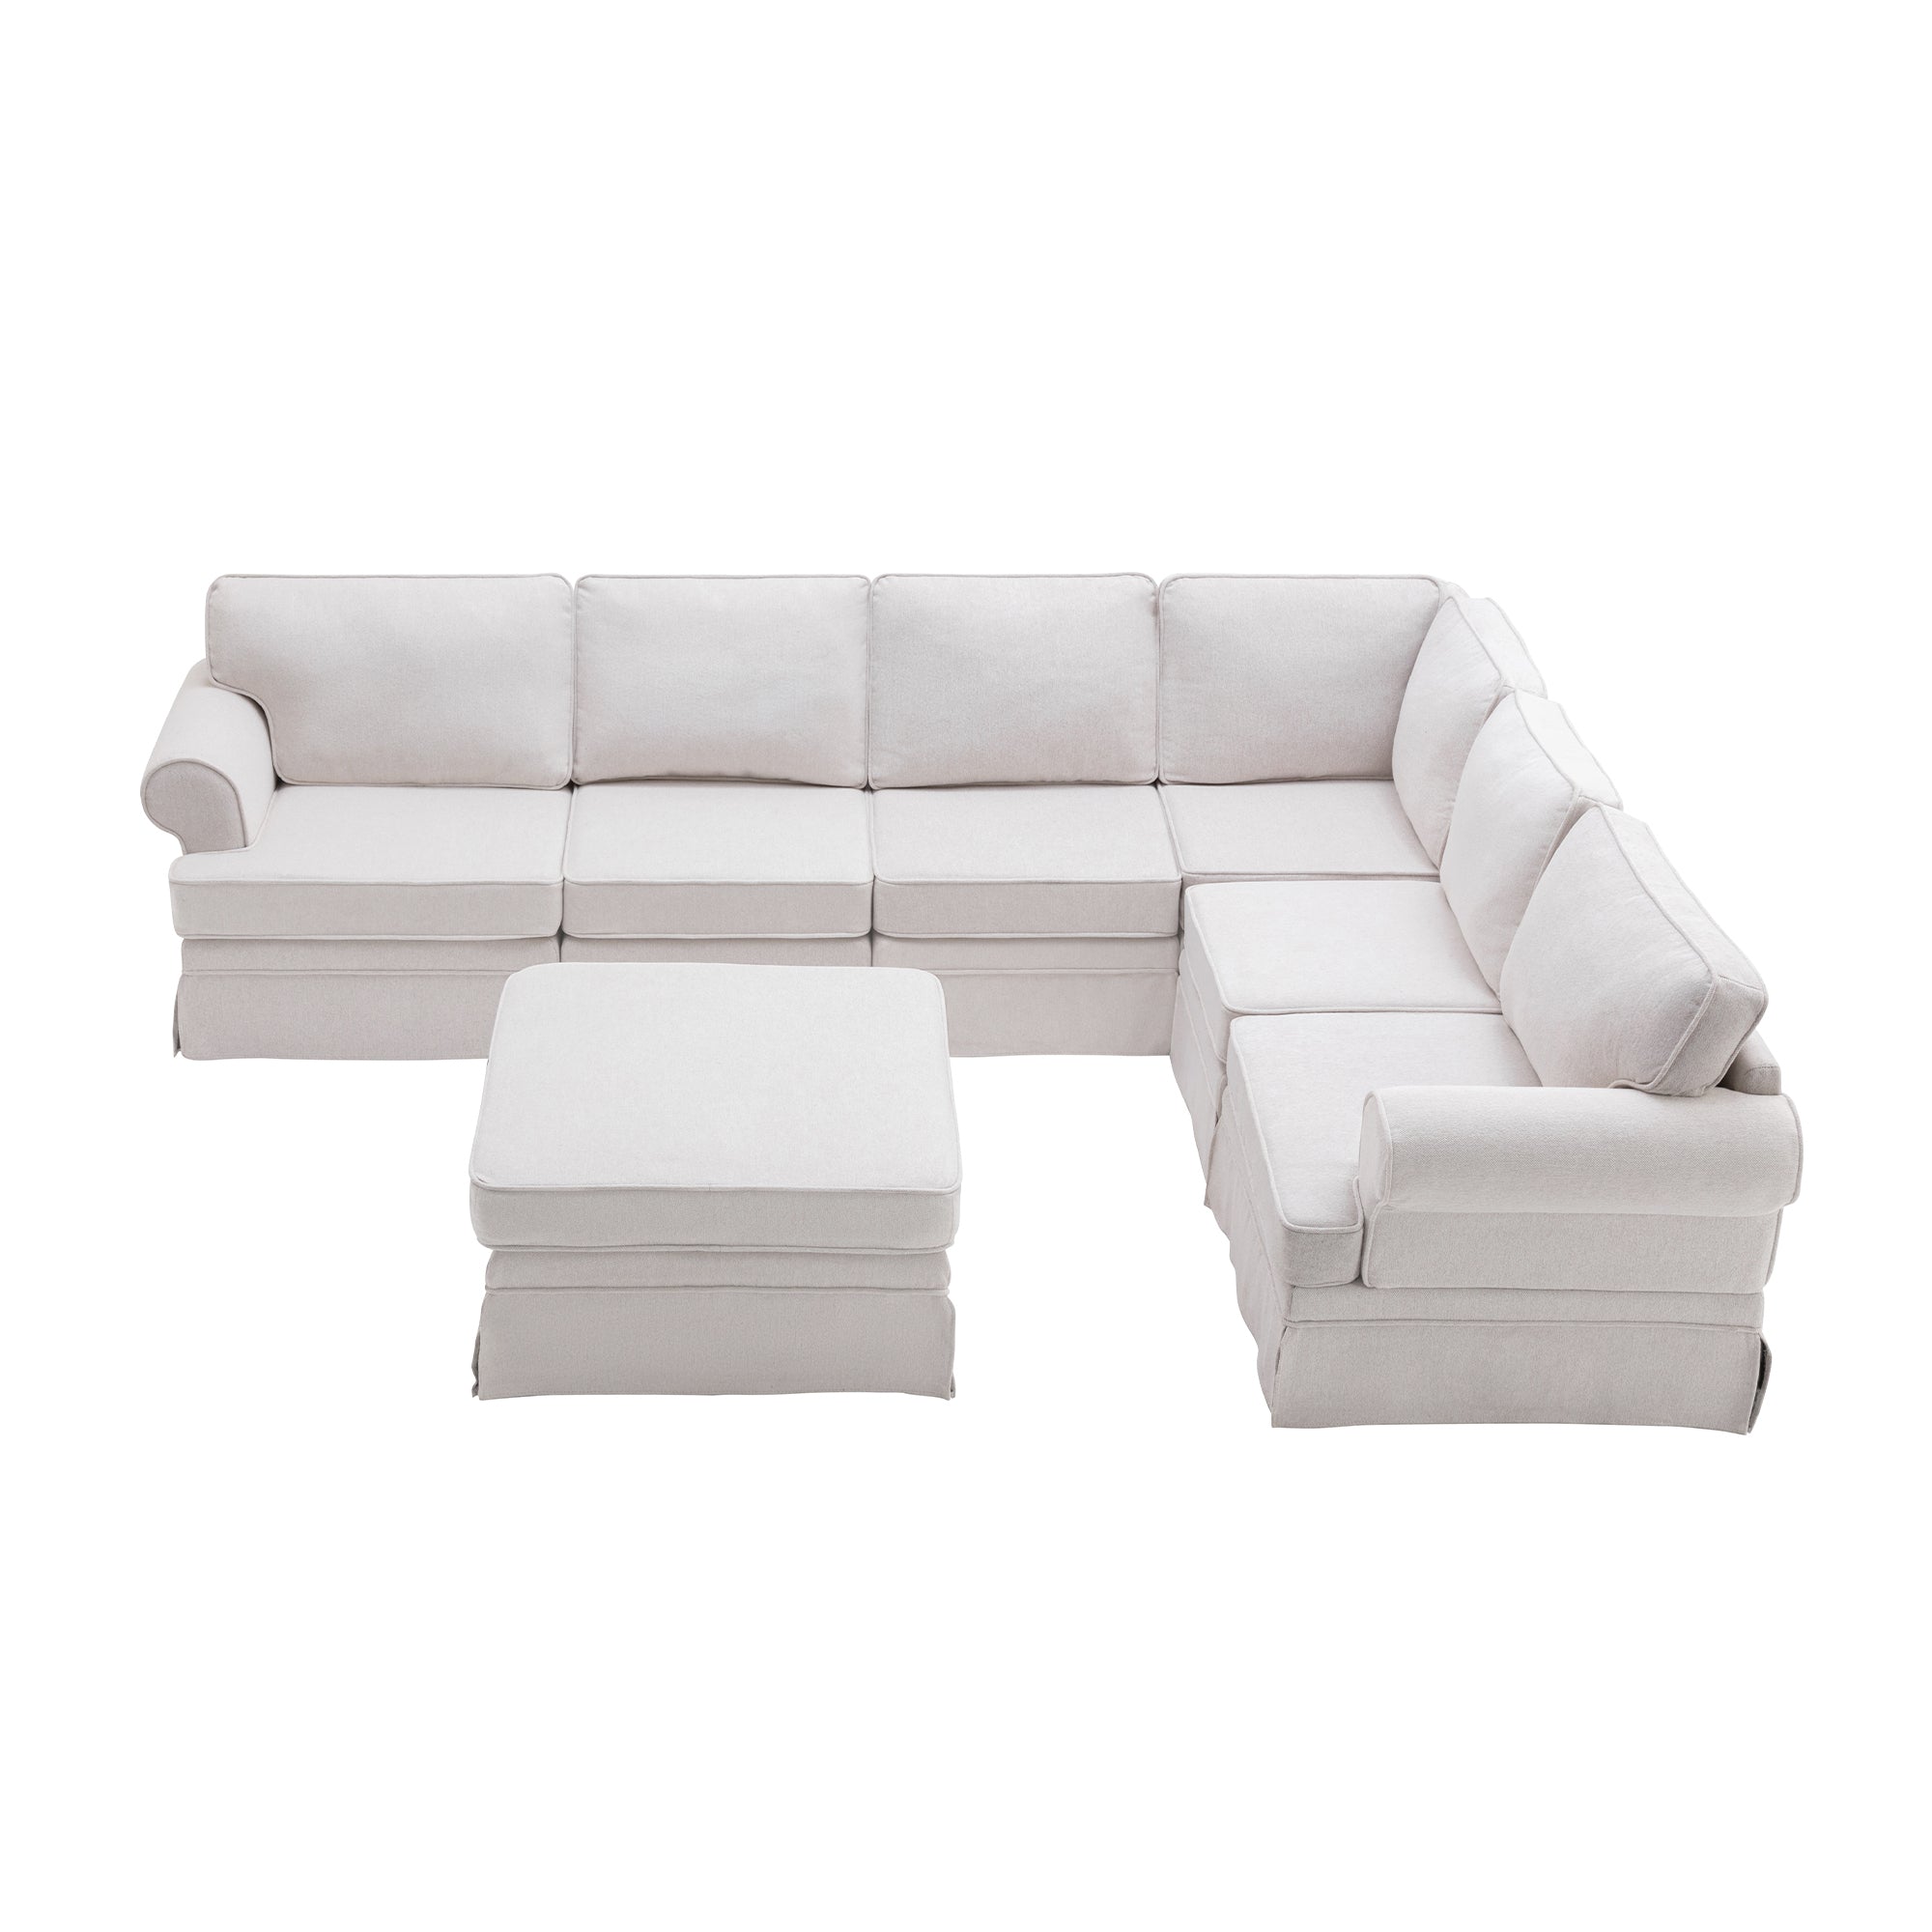 109.4" Fabric Upholstered Modular Sofa Collection, Sectional Couch with removable Ottoman  - Light Beige